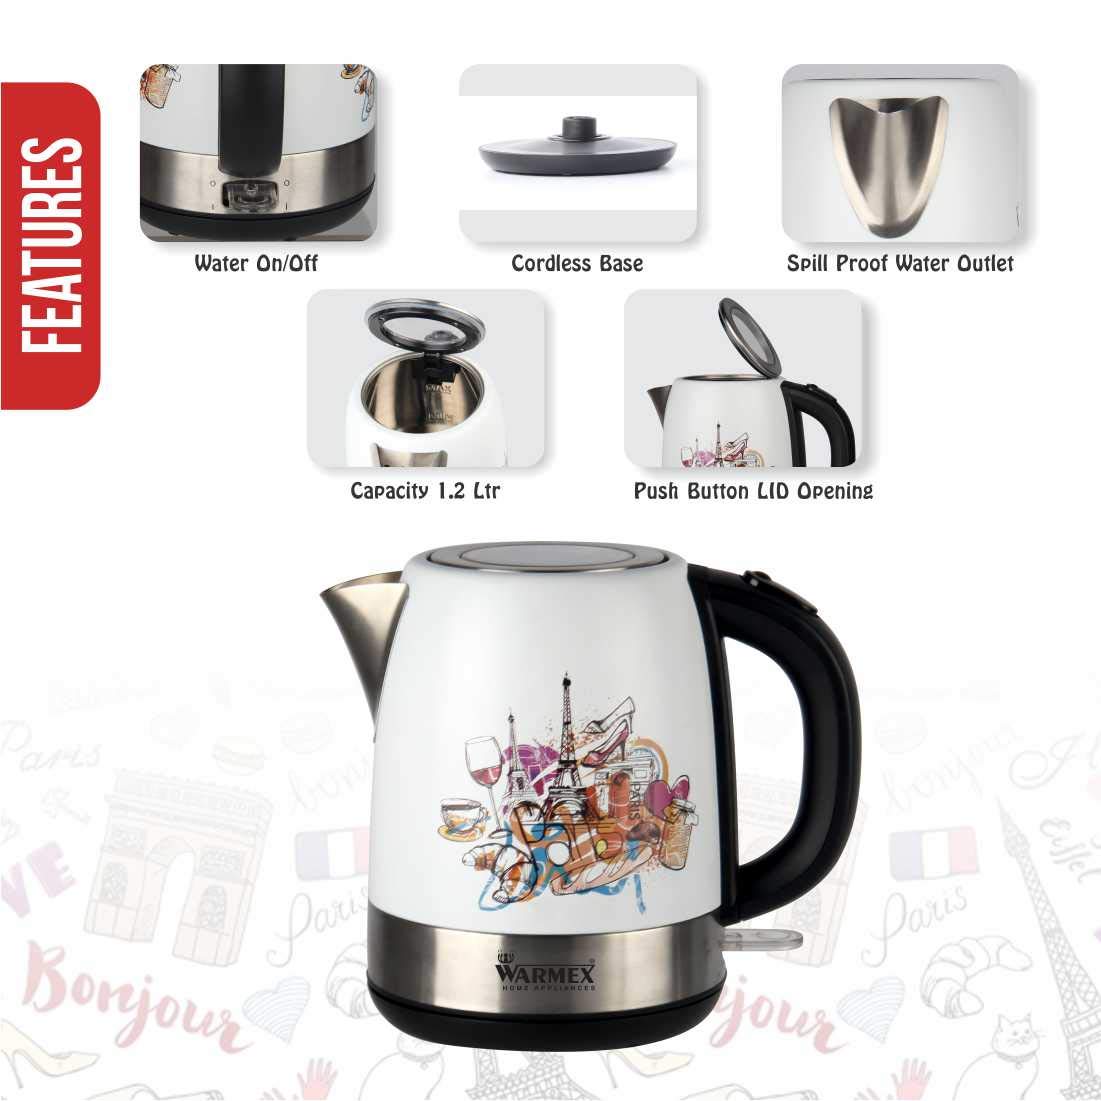 ELECTRIC KETTLE BONJOUR COLOR: WHITE & SS warmexhomeappliances2